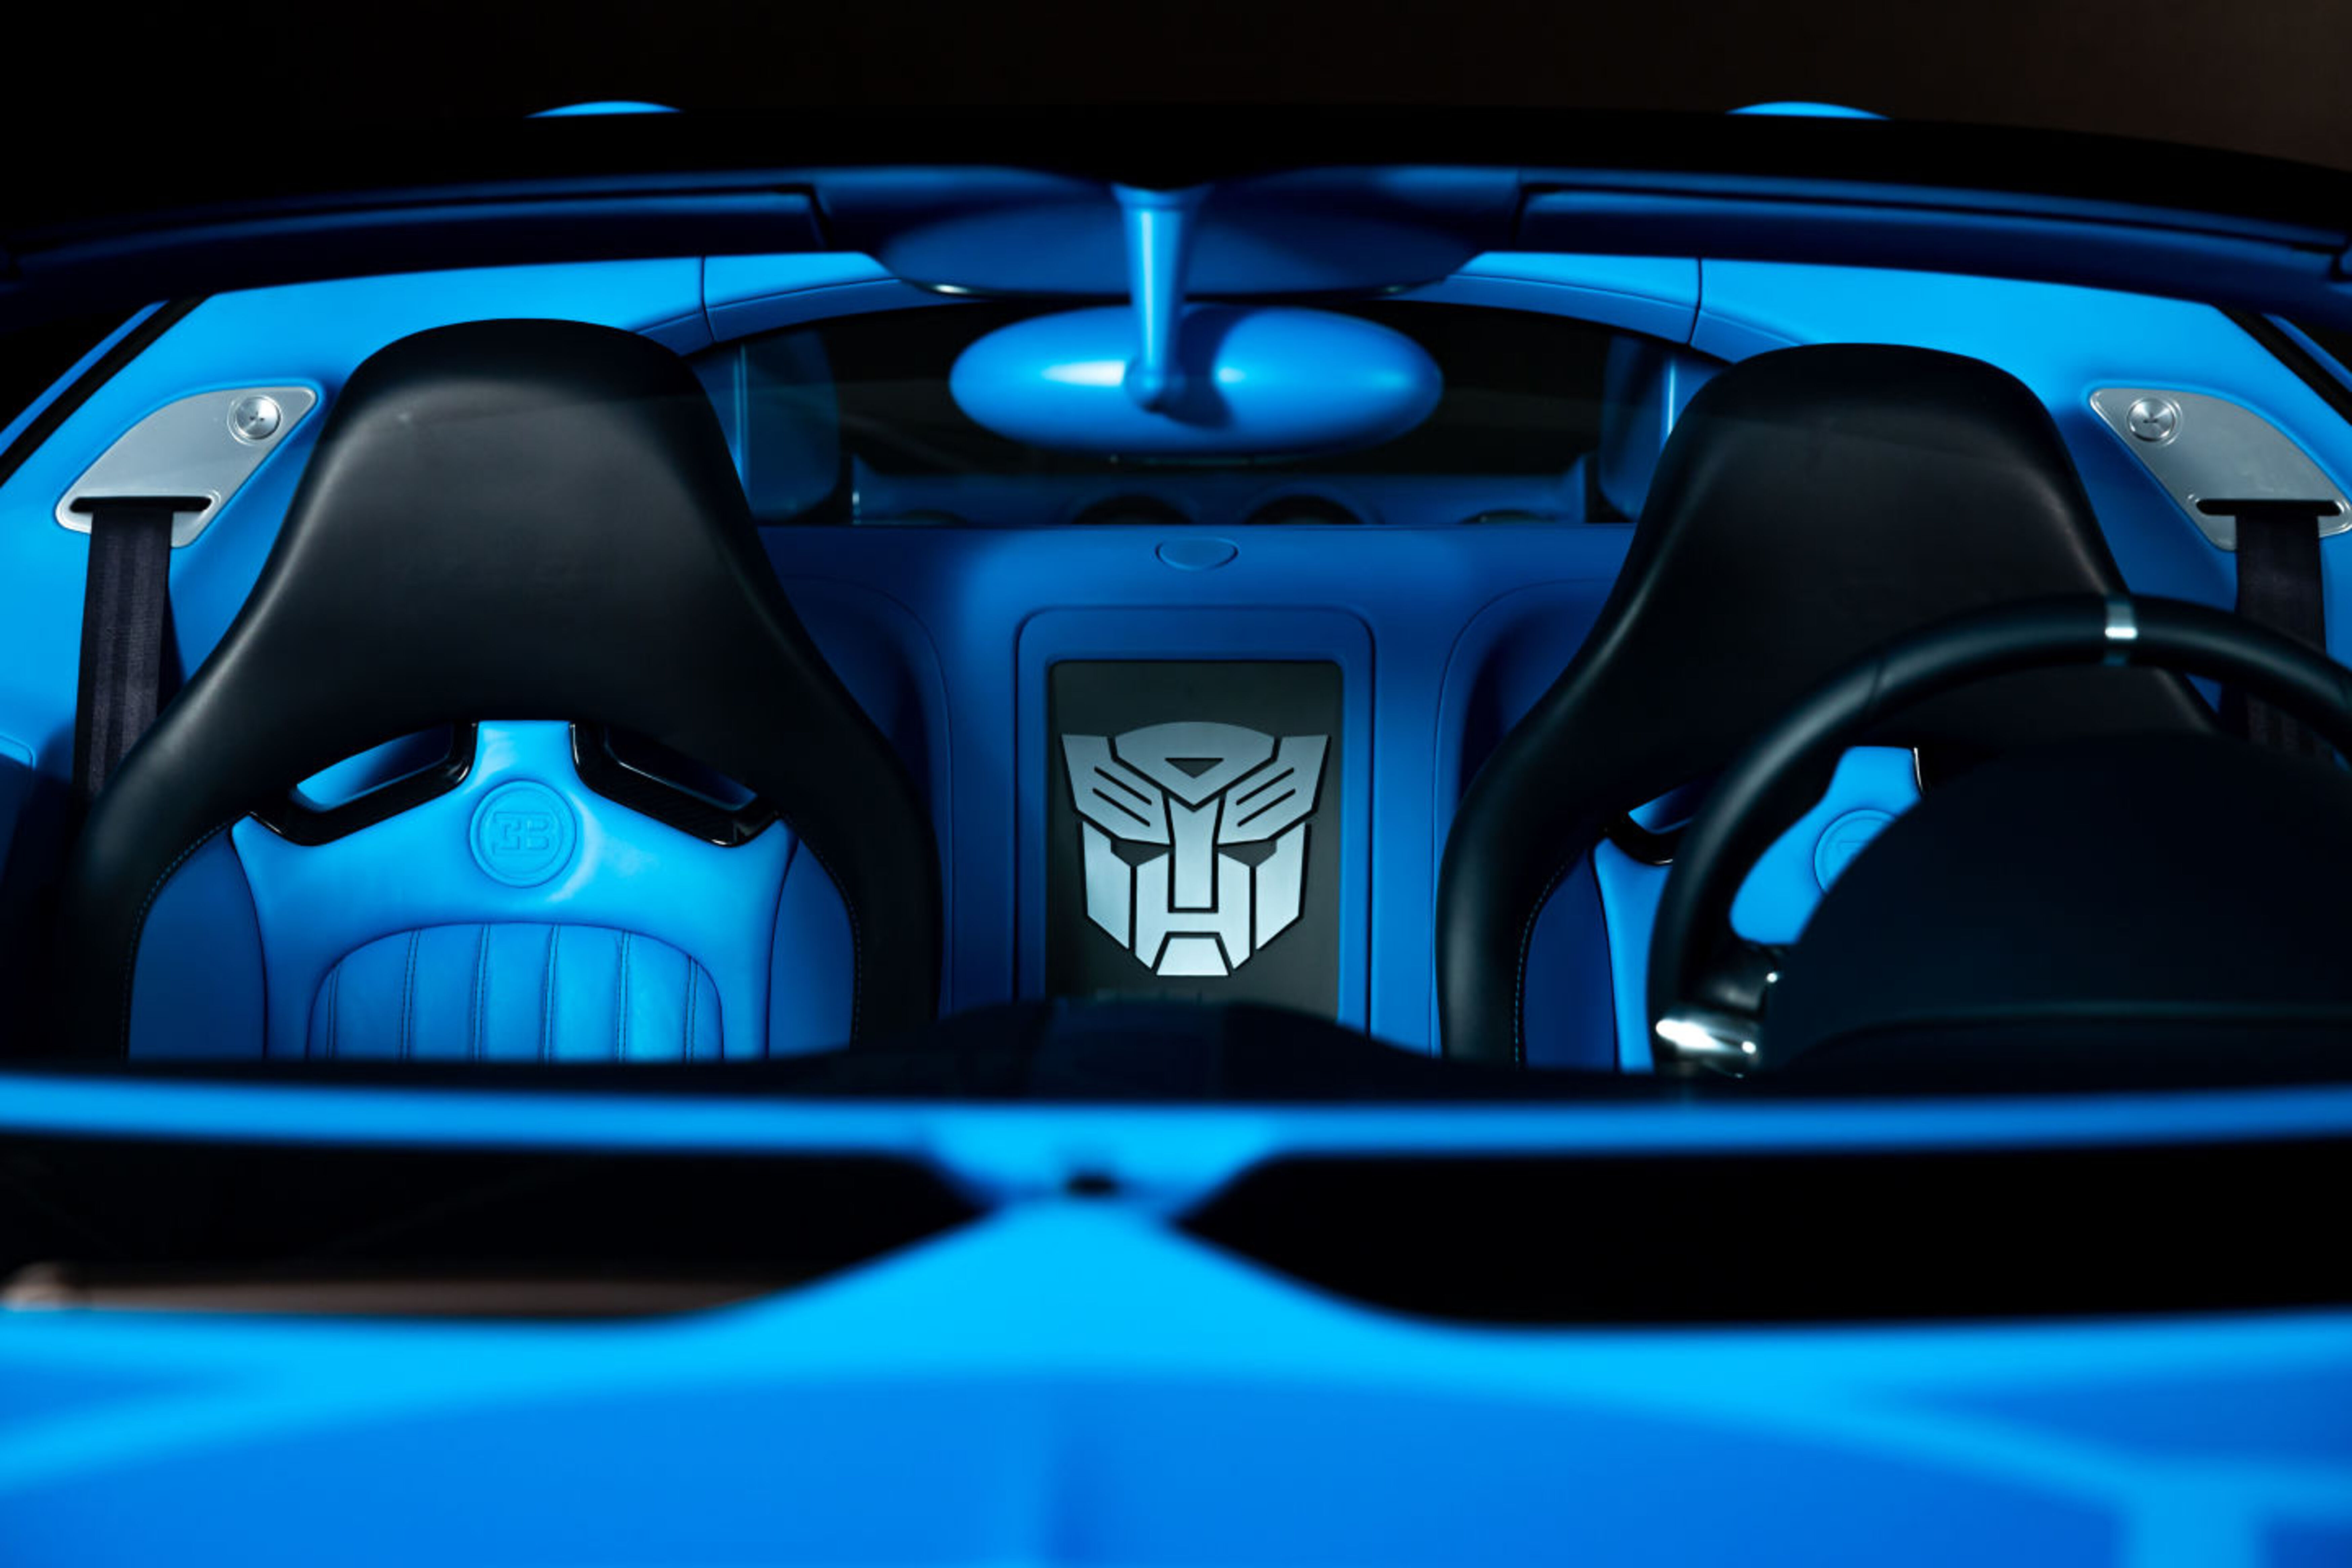 The Transformers logo inlaid between the seats